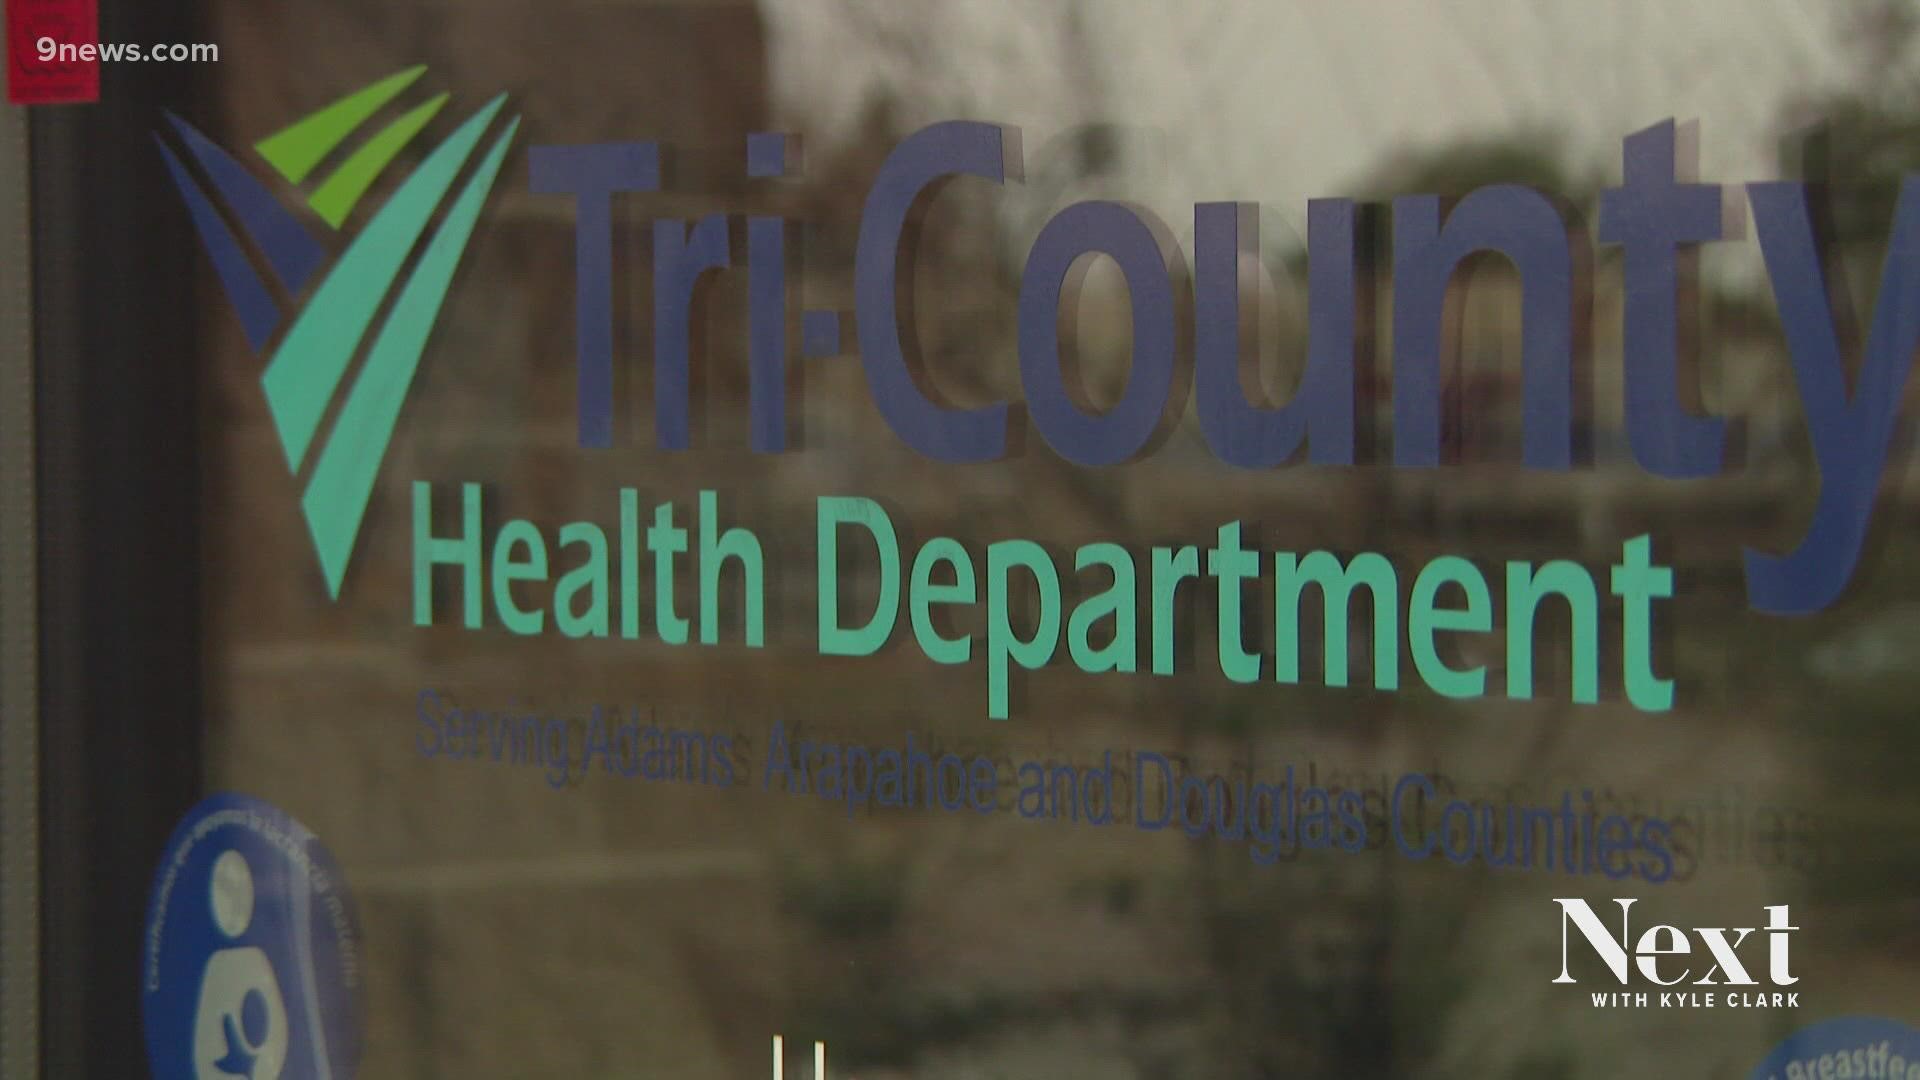 Today's Douglas and Tri-County meeting got awkward after a commissioner threatened to drop Tri-County and start an independent health department with Douglas County.